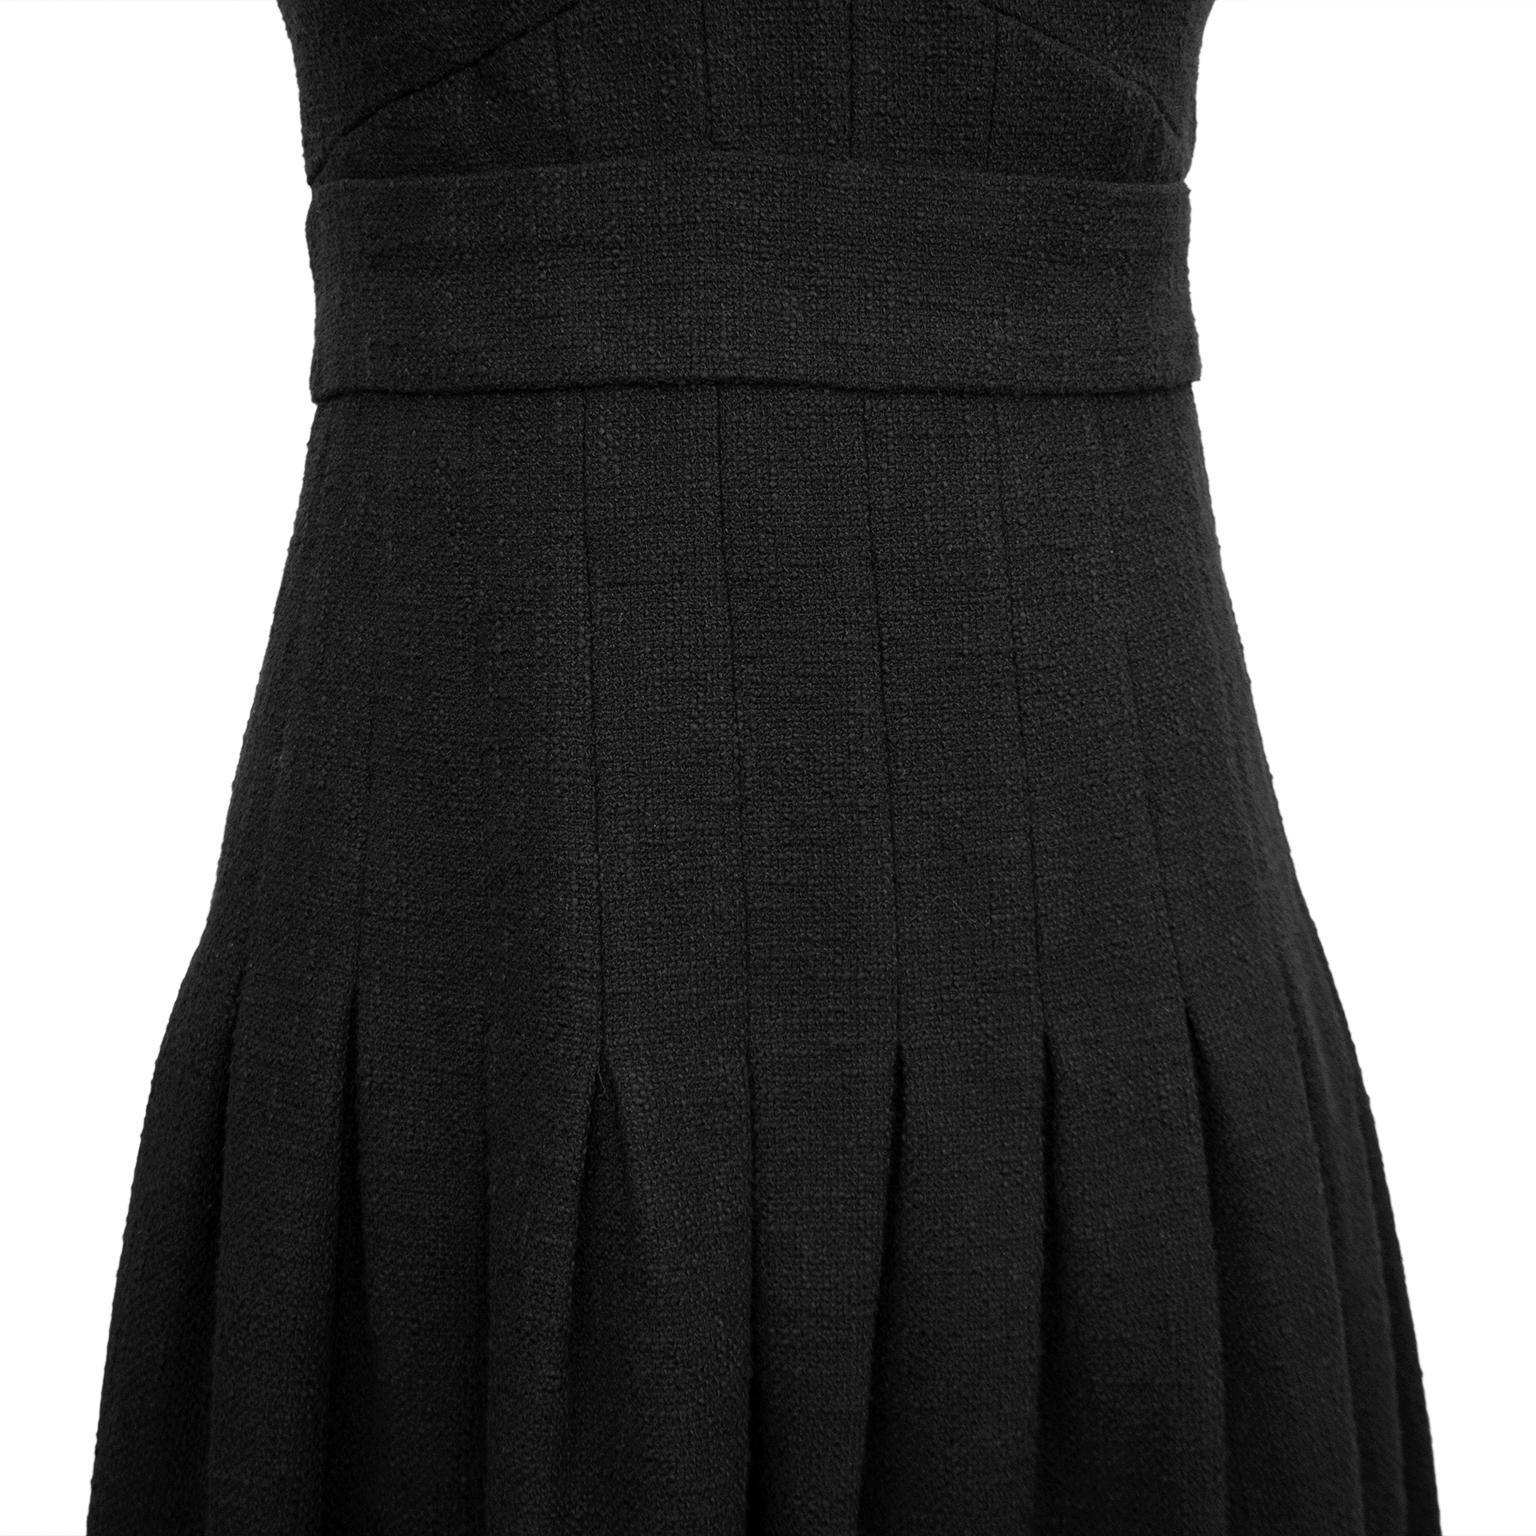 2007 Chanel Bouclé Off-The-Shoulder LBD In Good Condition For Sale In Toronto, Ontario